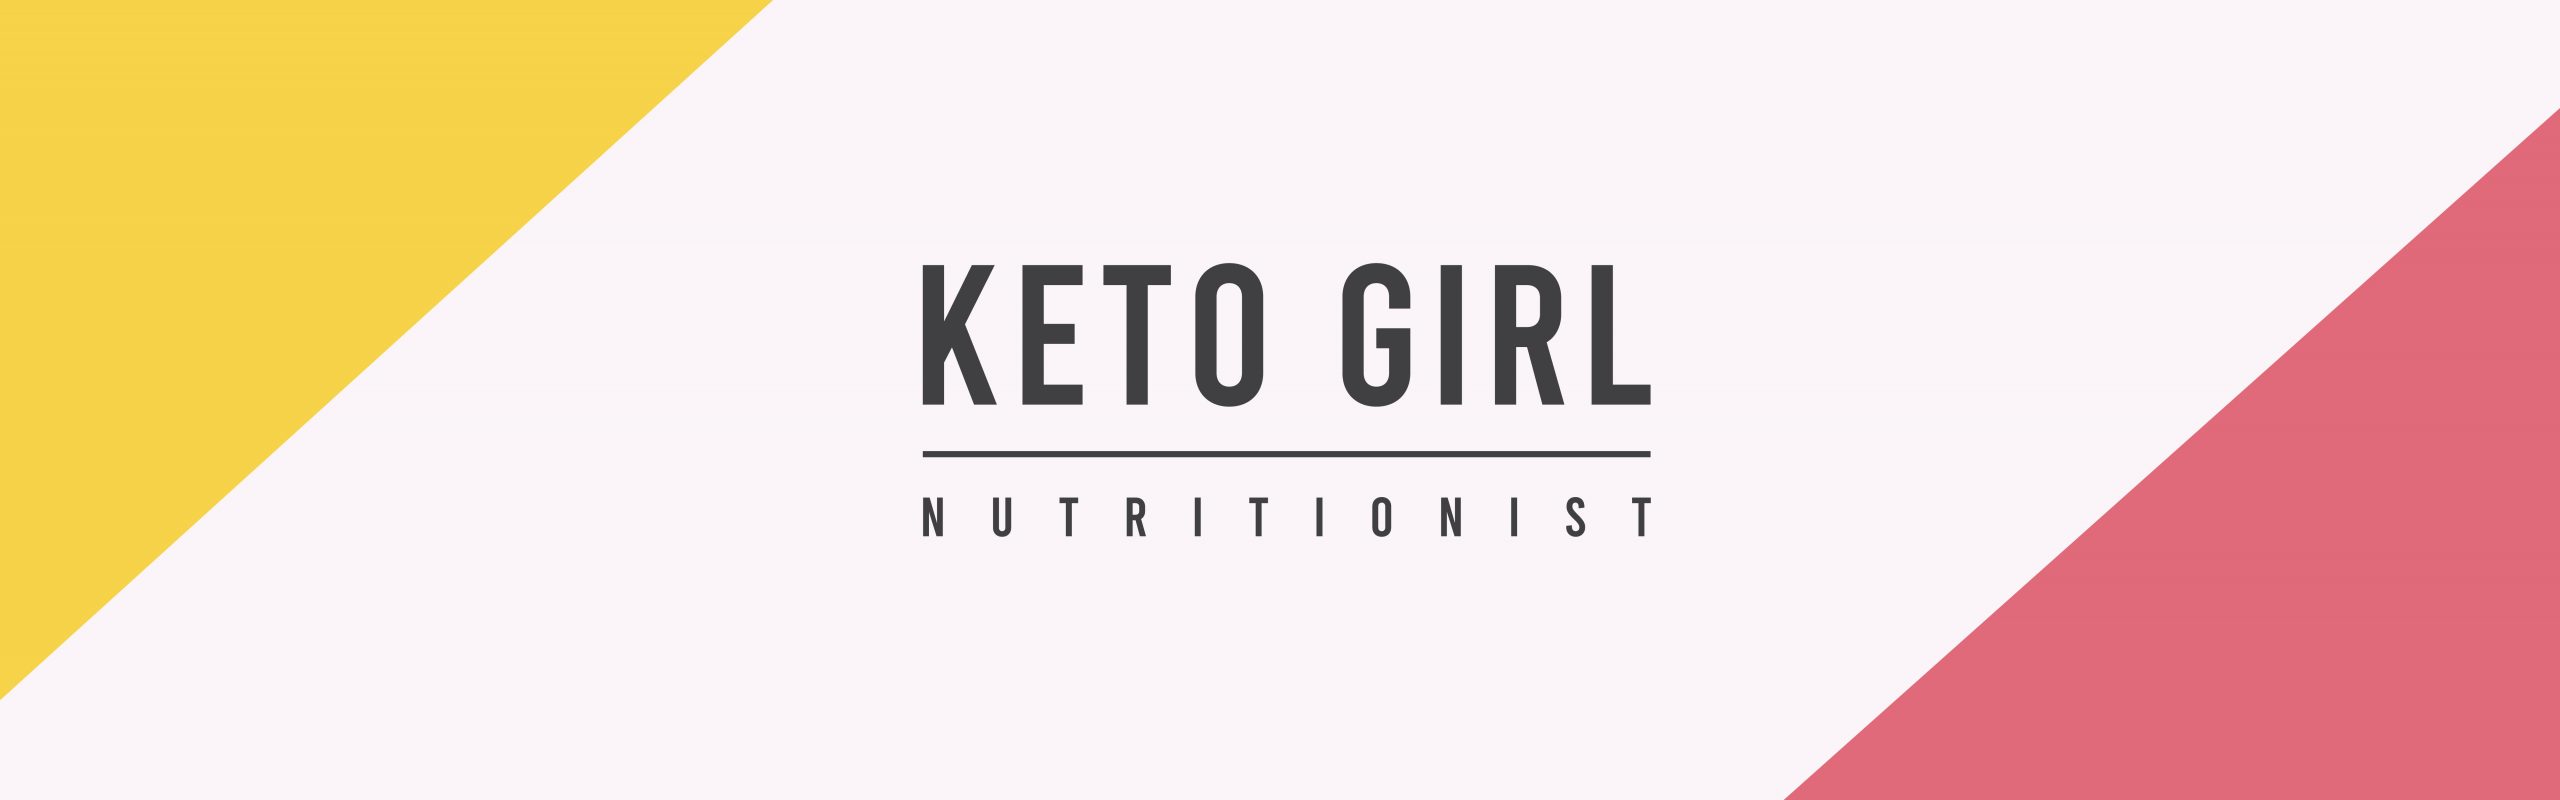 A graphic banner with a tricolor background in yellow, white, and pink, featuring the text "Keto Girl Nutritionist" in black font.